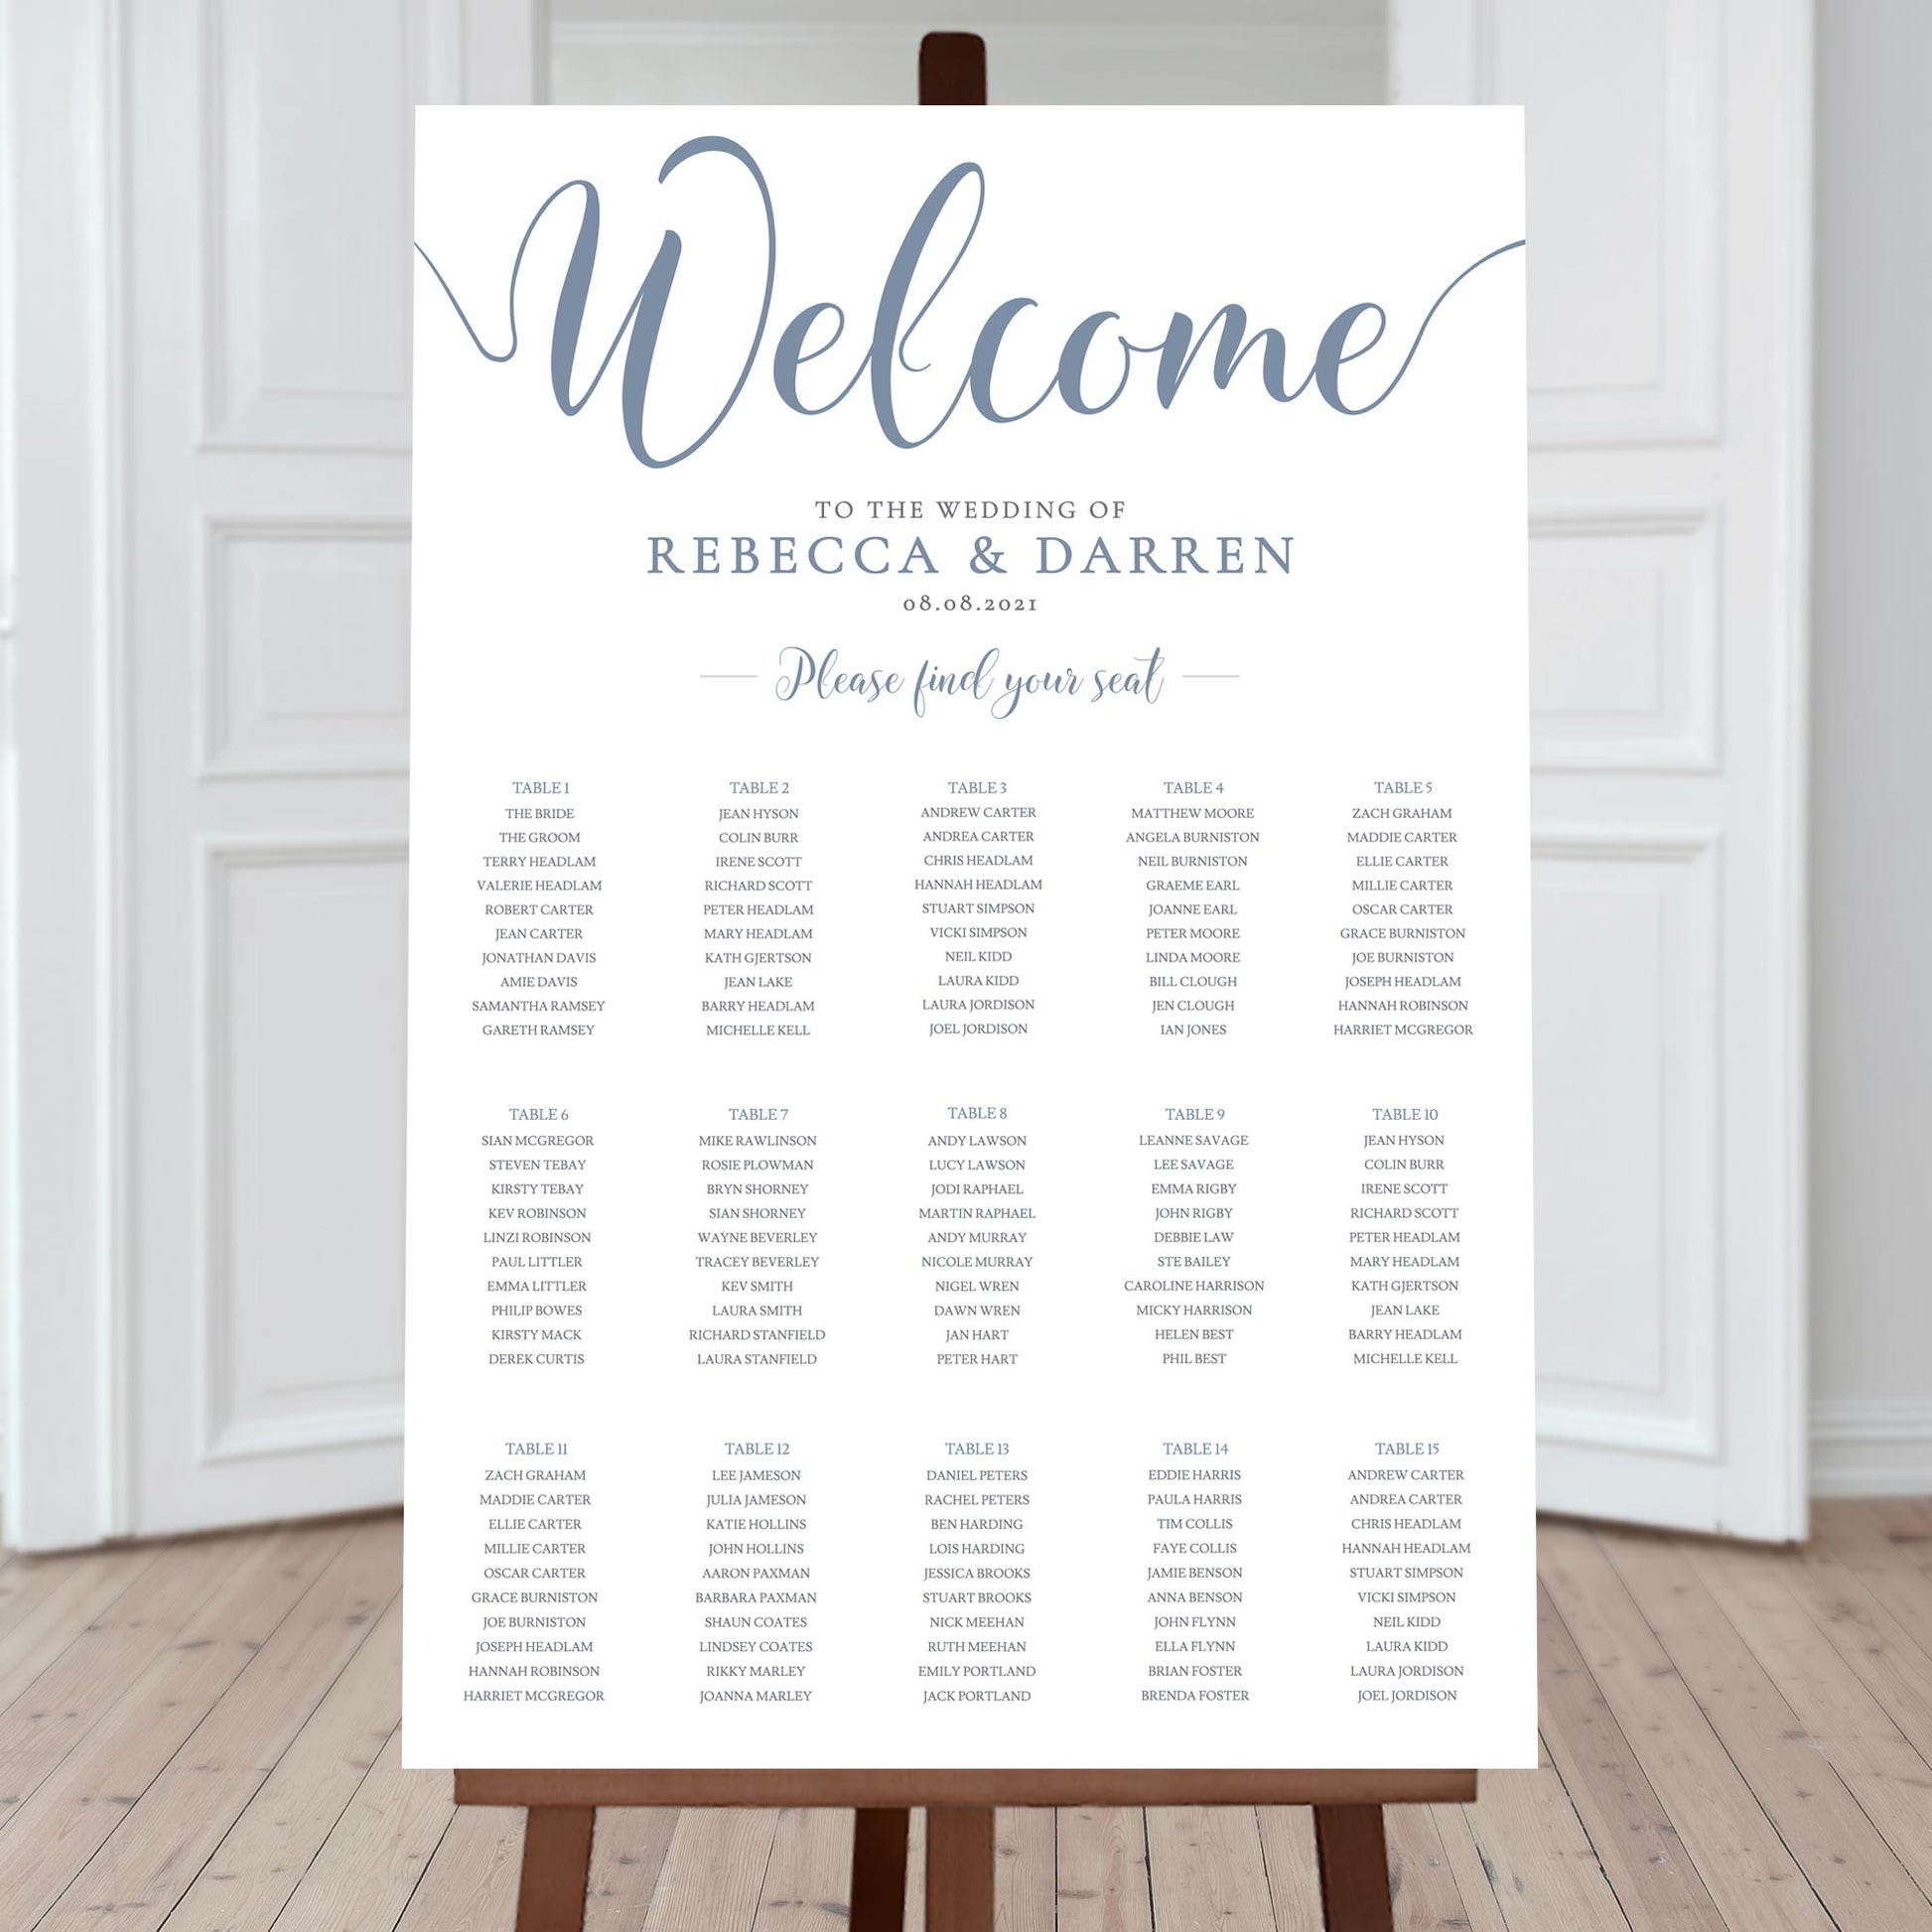 pale blue seating plan with 15 tables